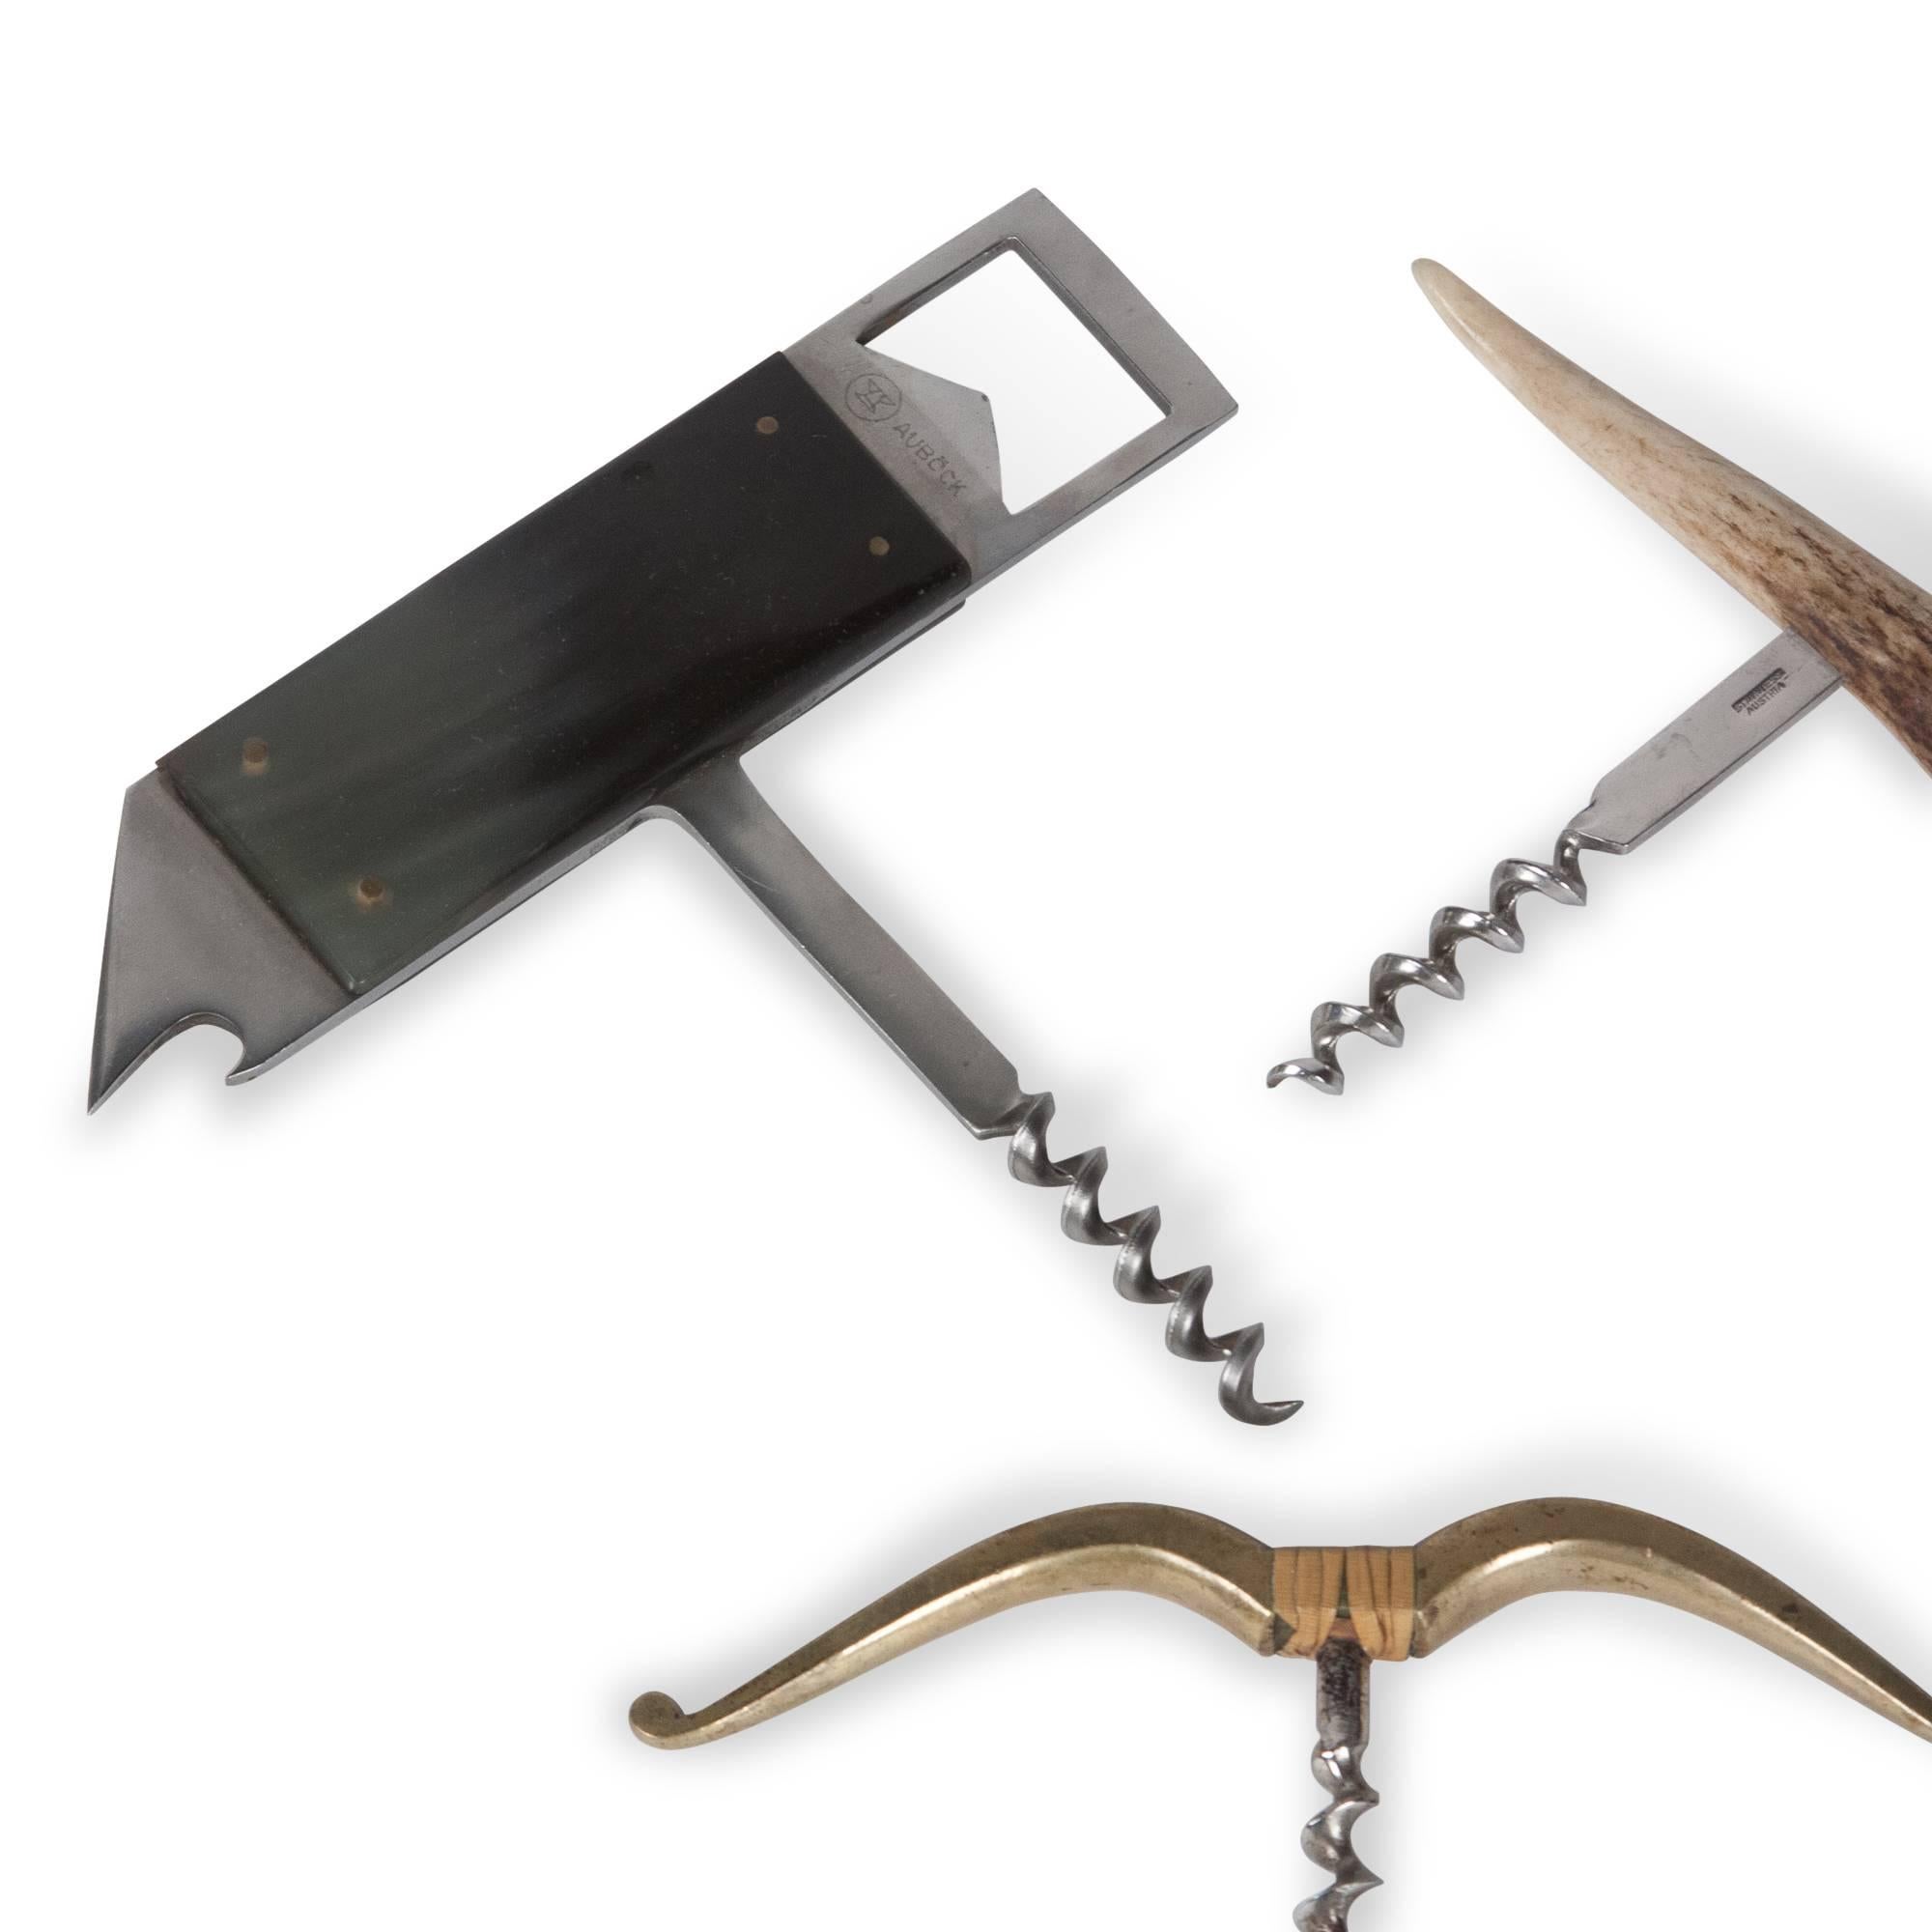 Three corkscrews.
Top left: Horn clad stainless steel bottle opener and corkscrew, by Carl Aubock, Austria, 1950s. Etched signature. Width 5 1/2 in, height of handle 1 5/8 in, length 5 1/4 in.  
Top right: Horn or tusk corkscrew, stainless screw